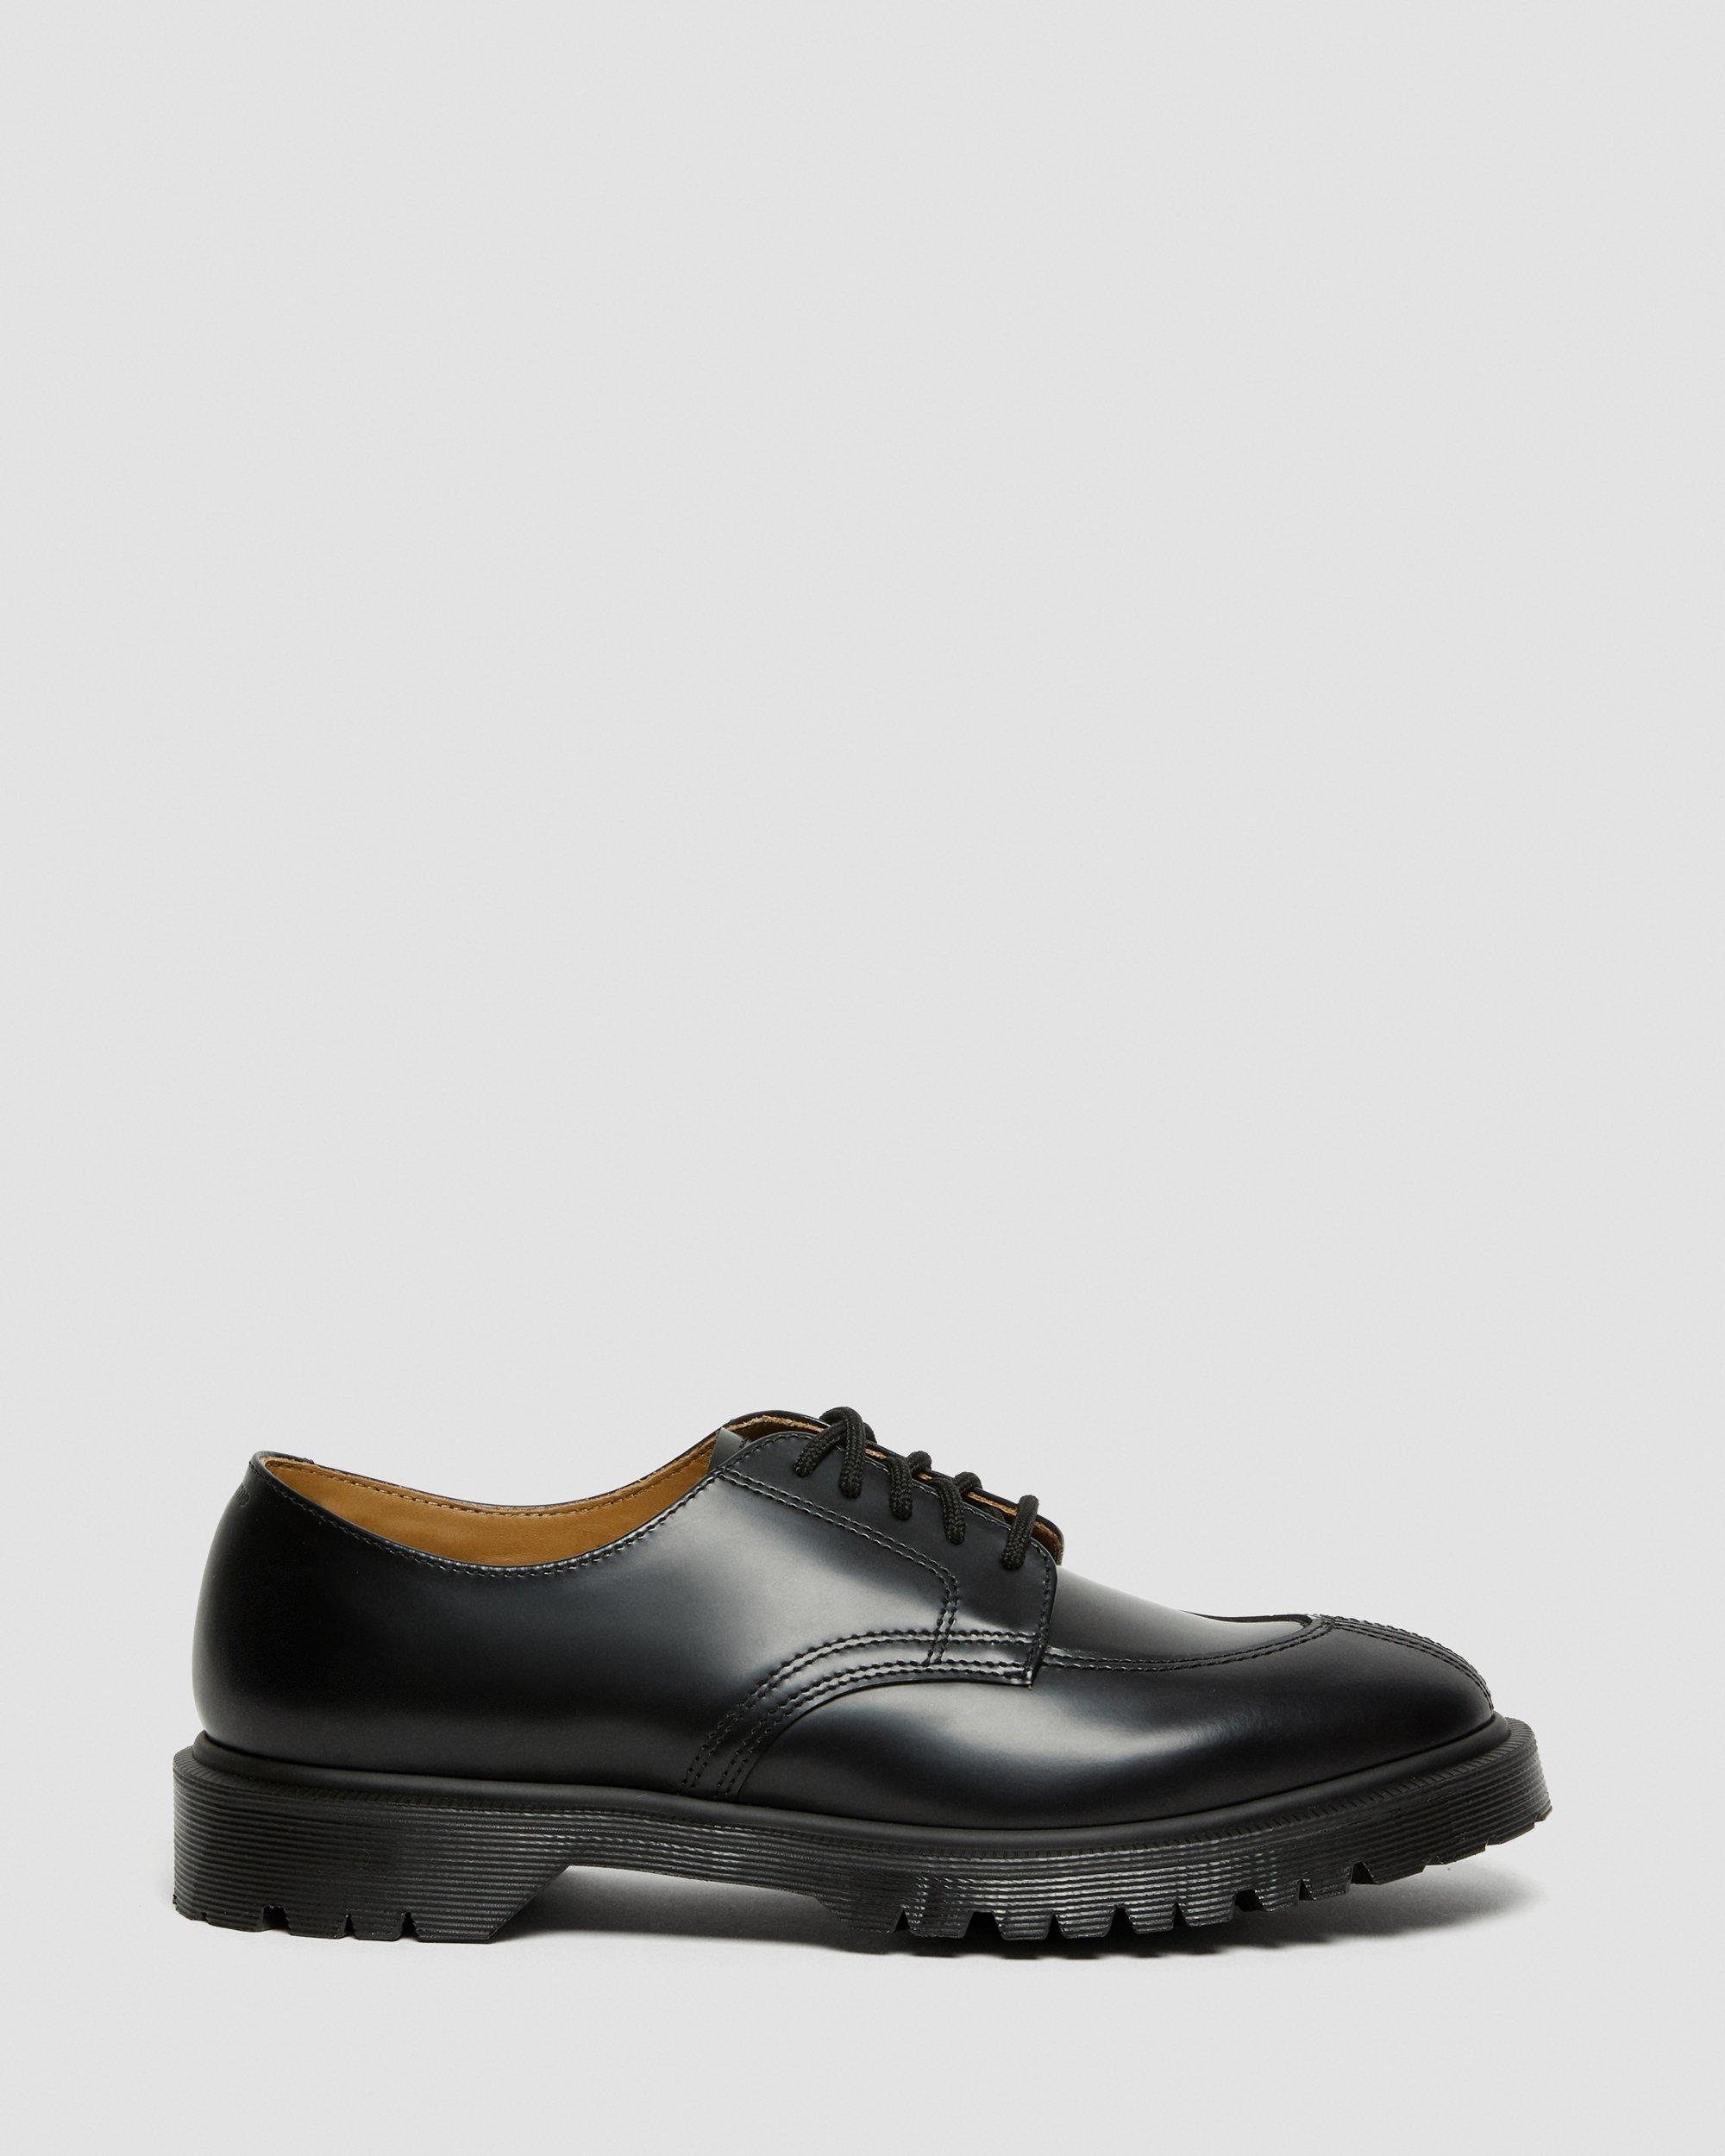 https://i1.adis.ws/i/drmartens/27150001.88.jpg?$large$Supreme® 2046 Smooth Leather Oxford Shoes Dr. Martens